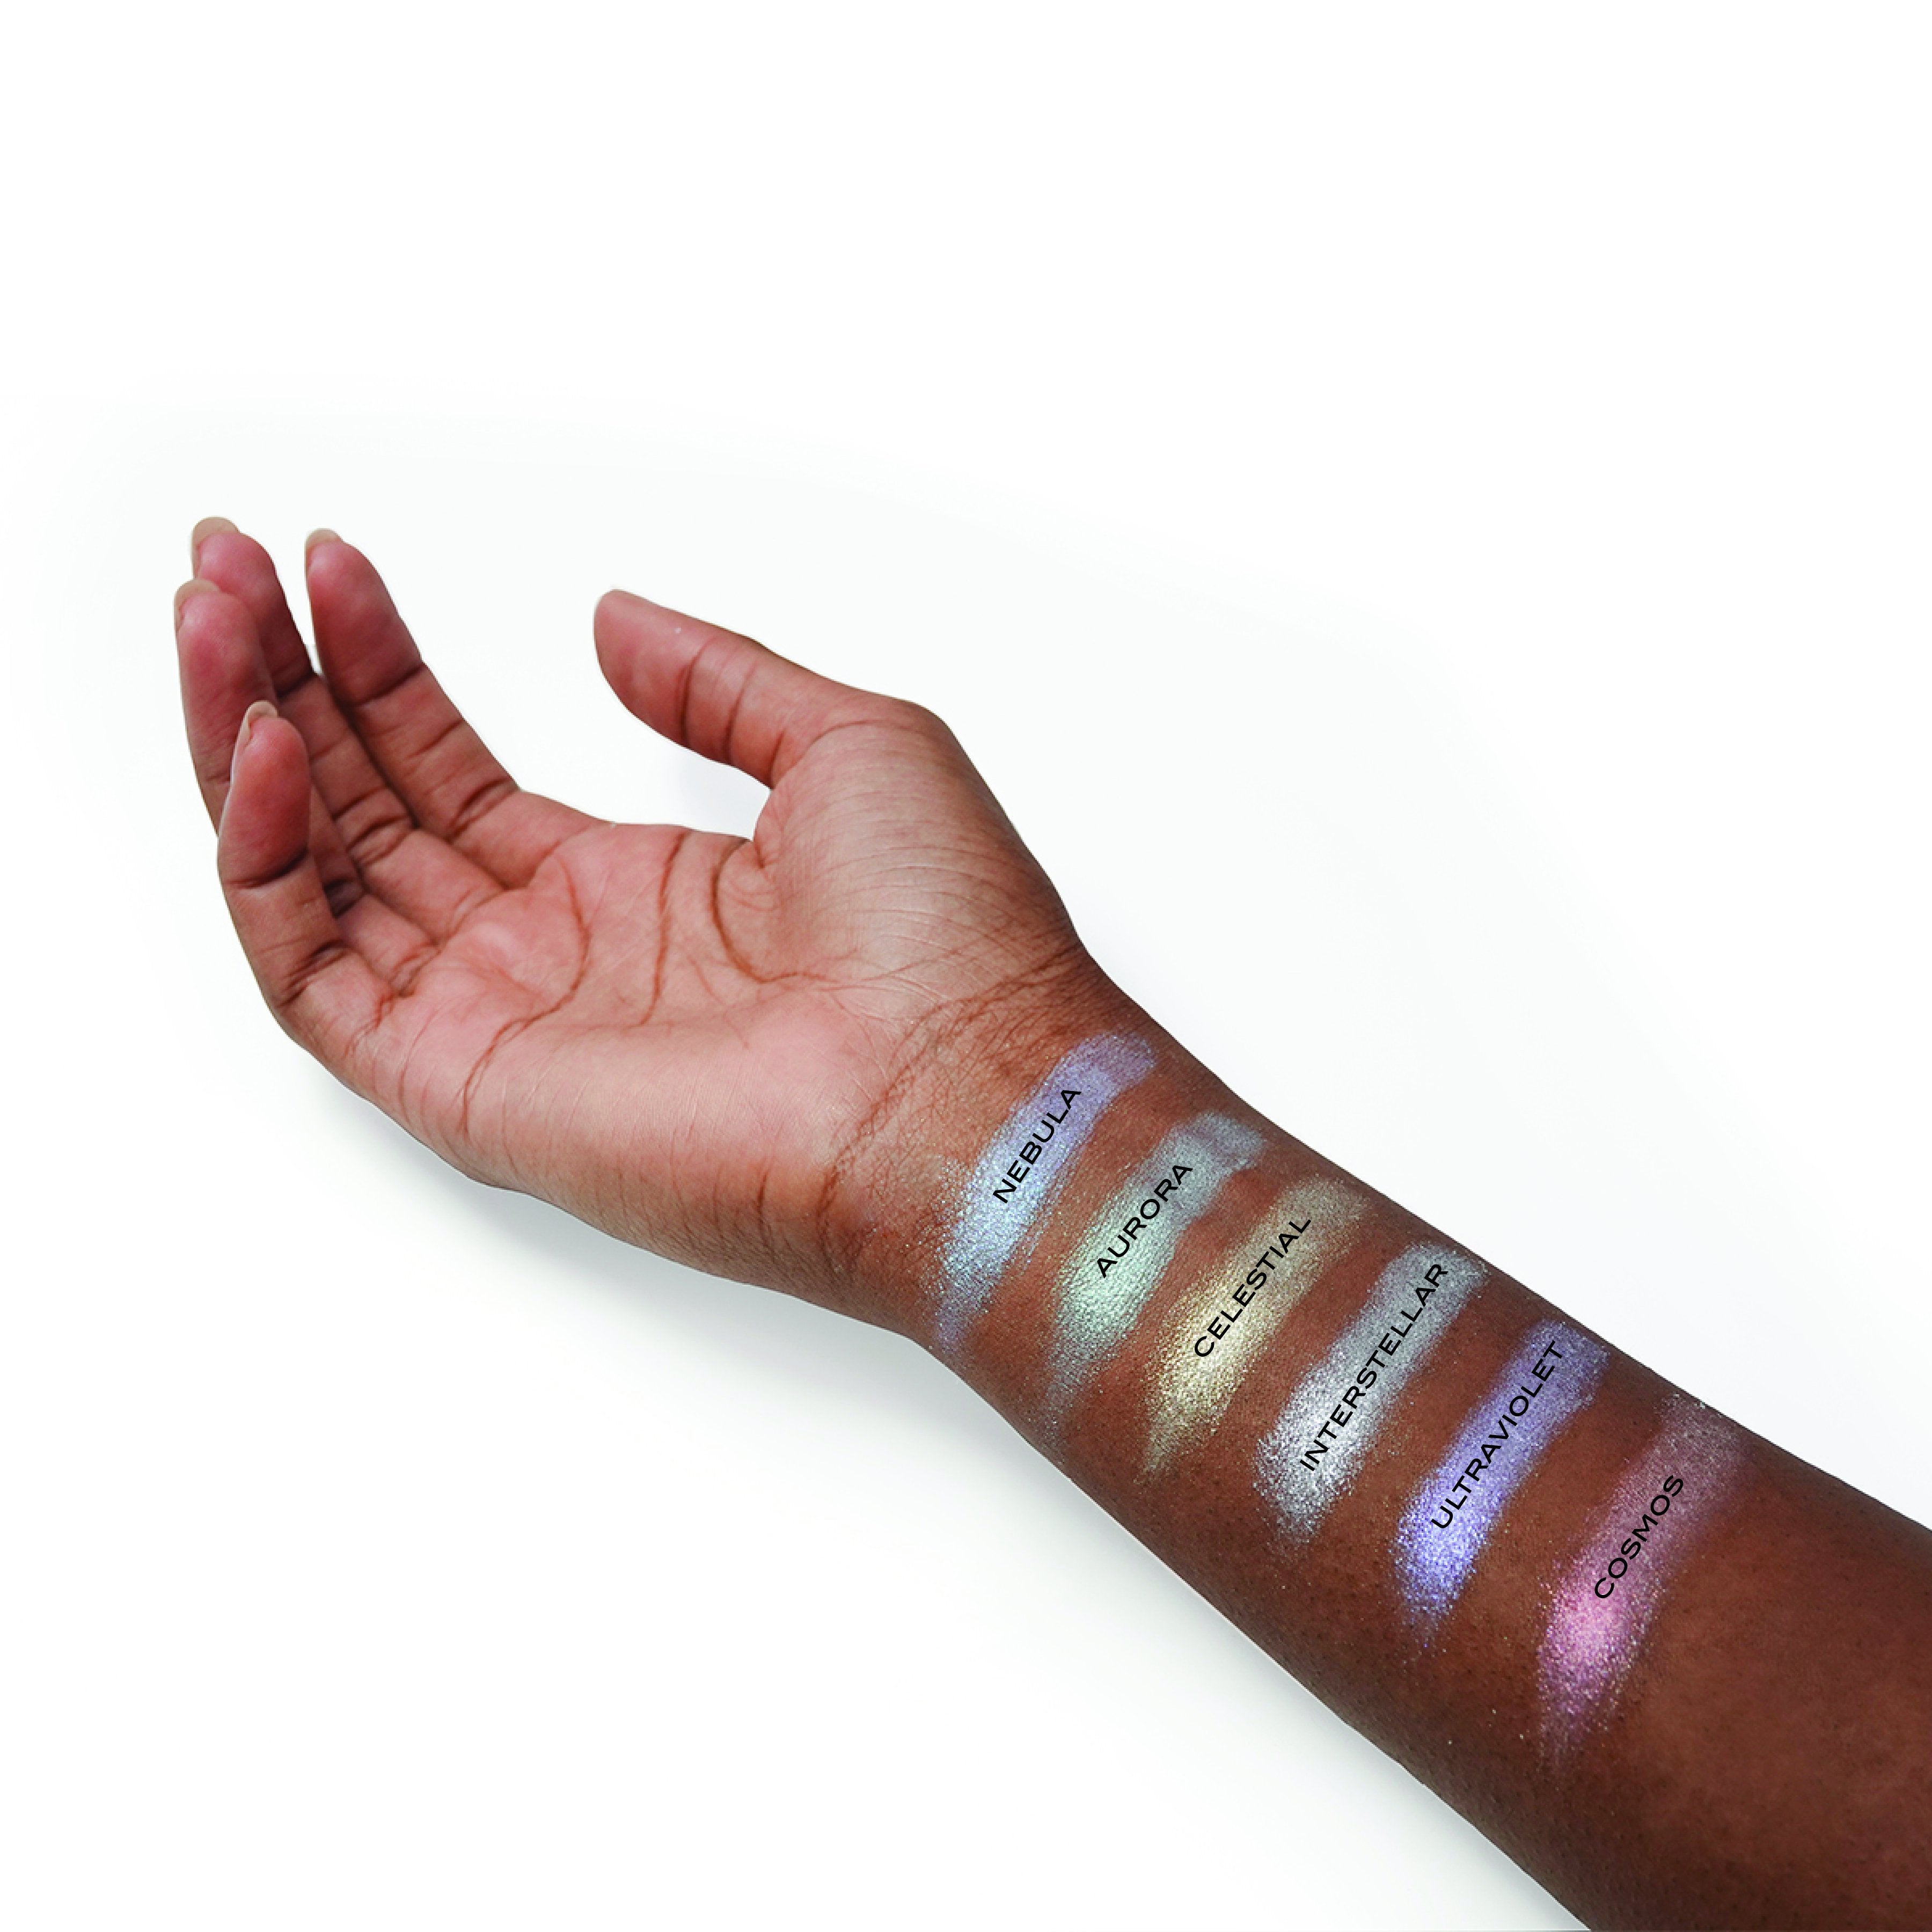 LIGHT MATTER - TAUPE CREAM EYESHADOW- Swatches showing peachy-taupe cream shadow topped with our twinkling halogram shadows 1